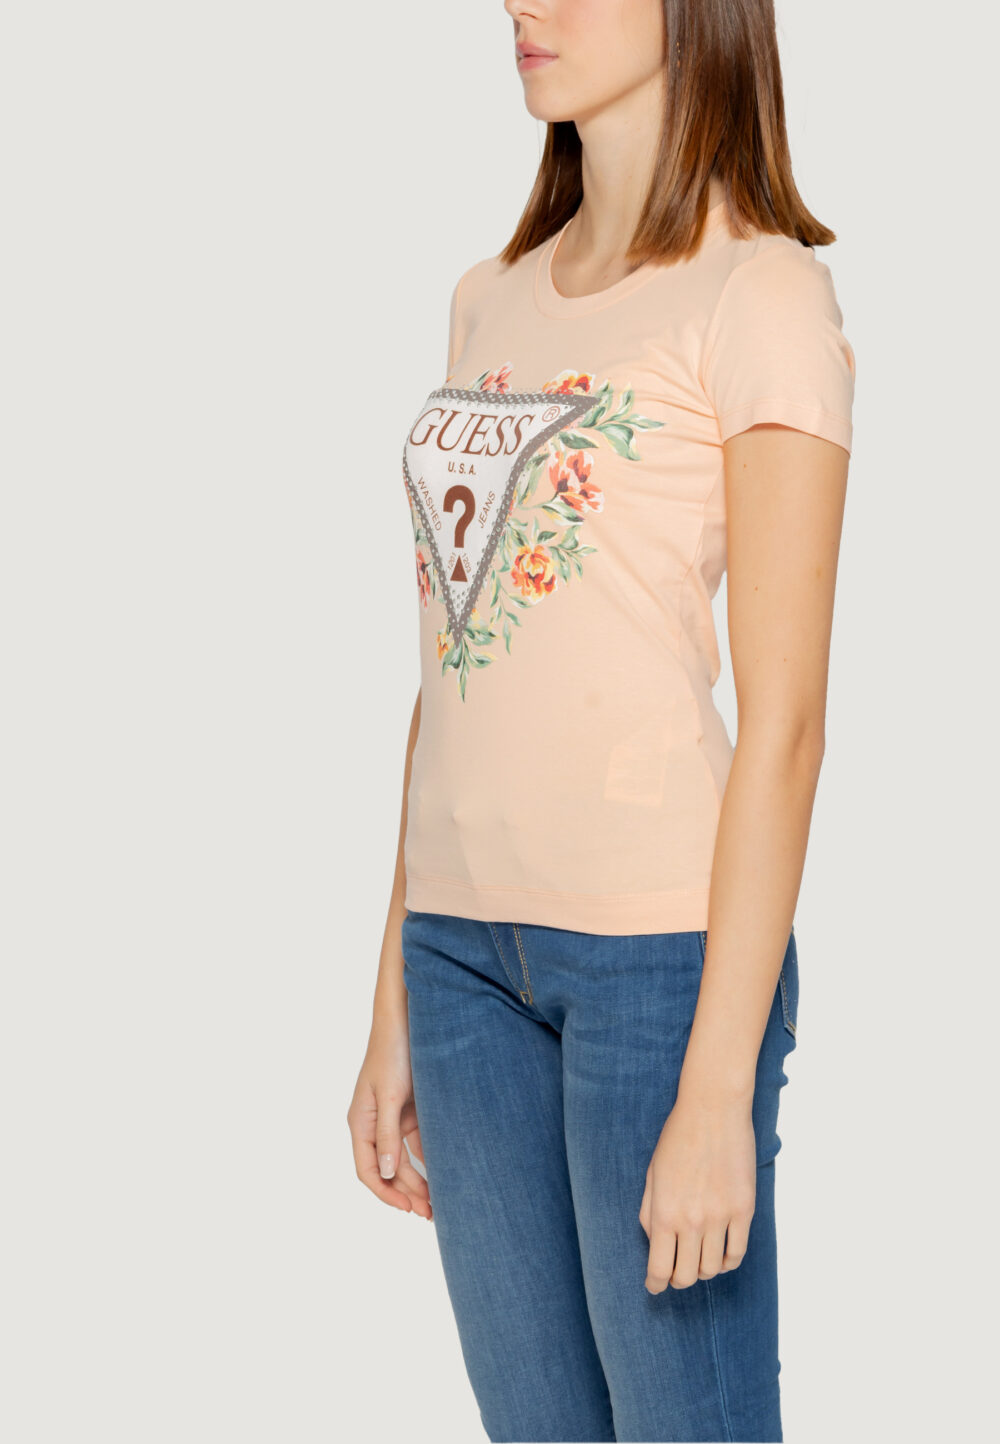 T-shirt Guess SS CN TRIANGLE FLOWERS Pesca - Foto 3